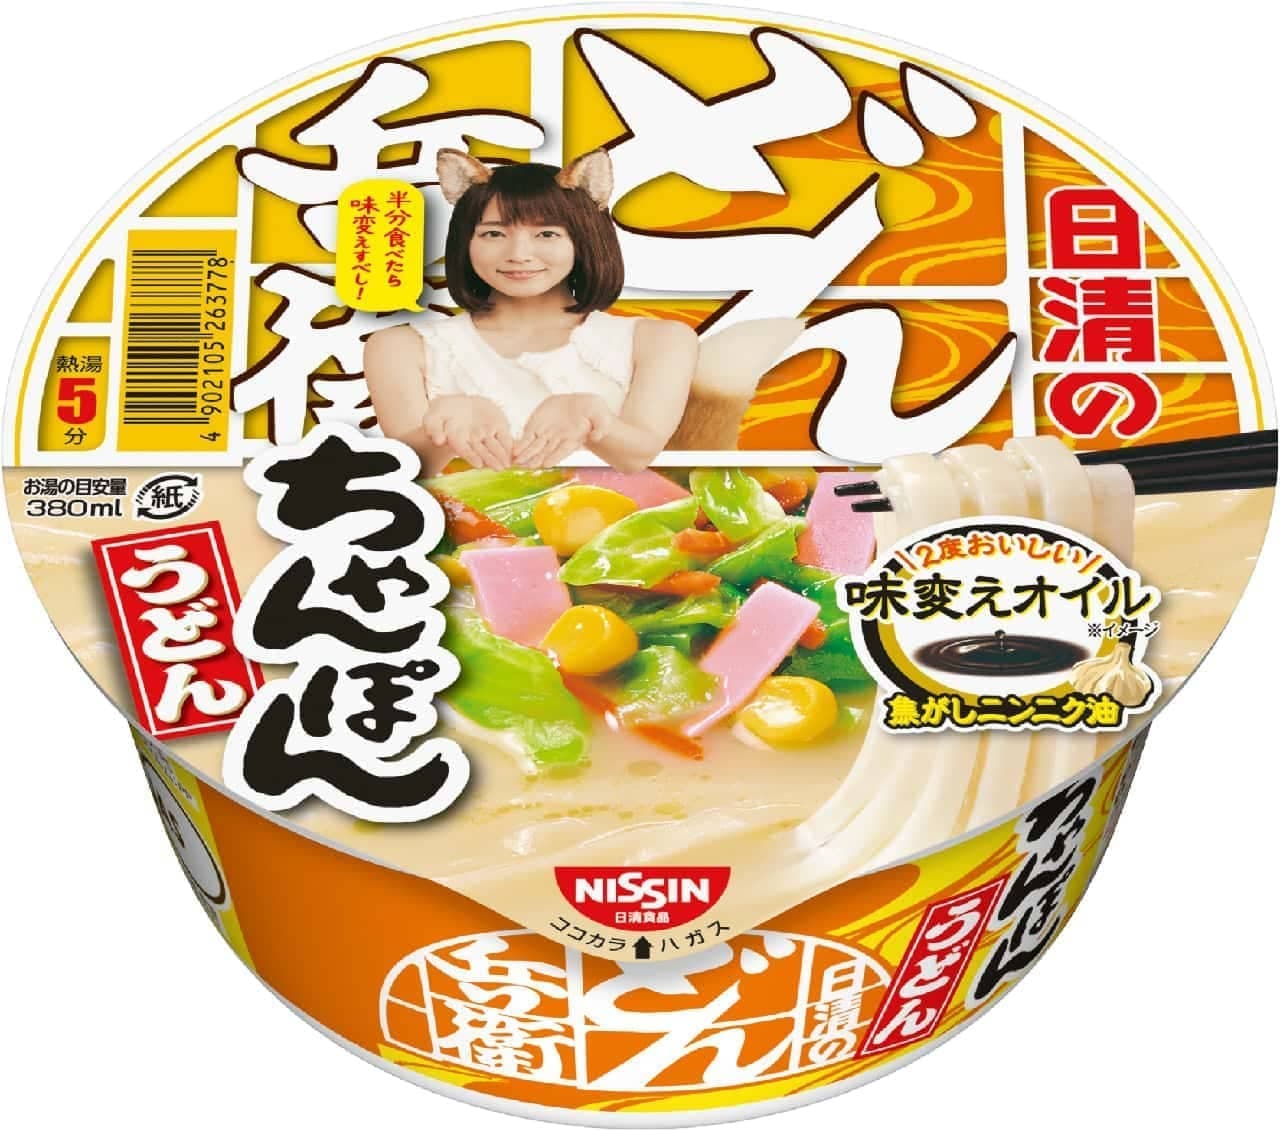 Nissin Donbei Champon Udon with flavor-changing oil